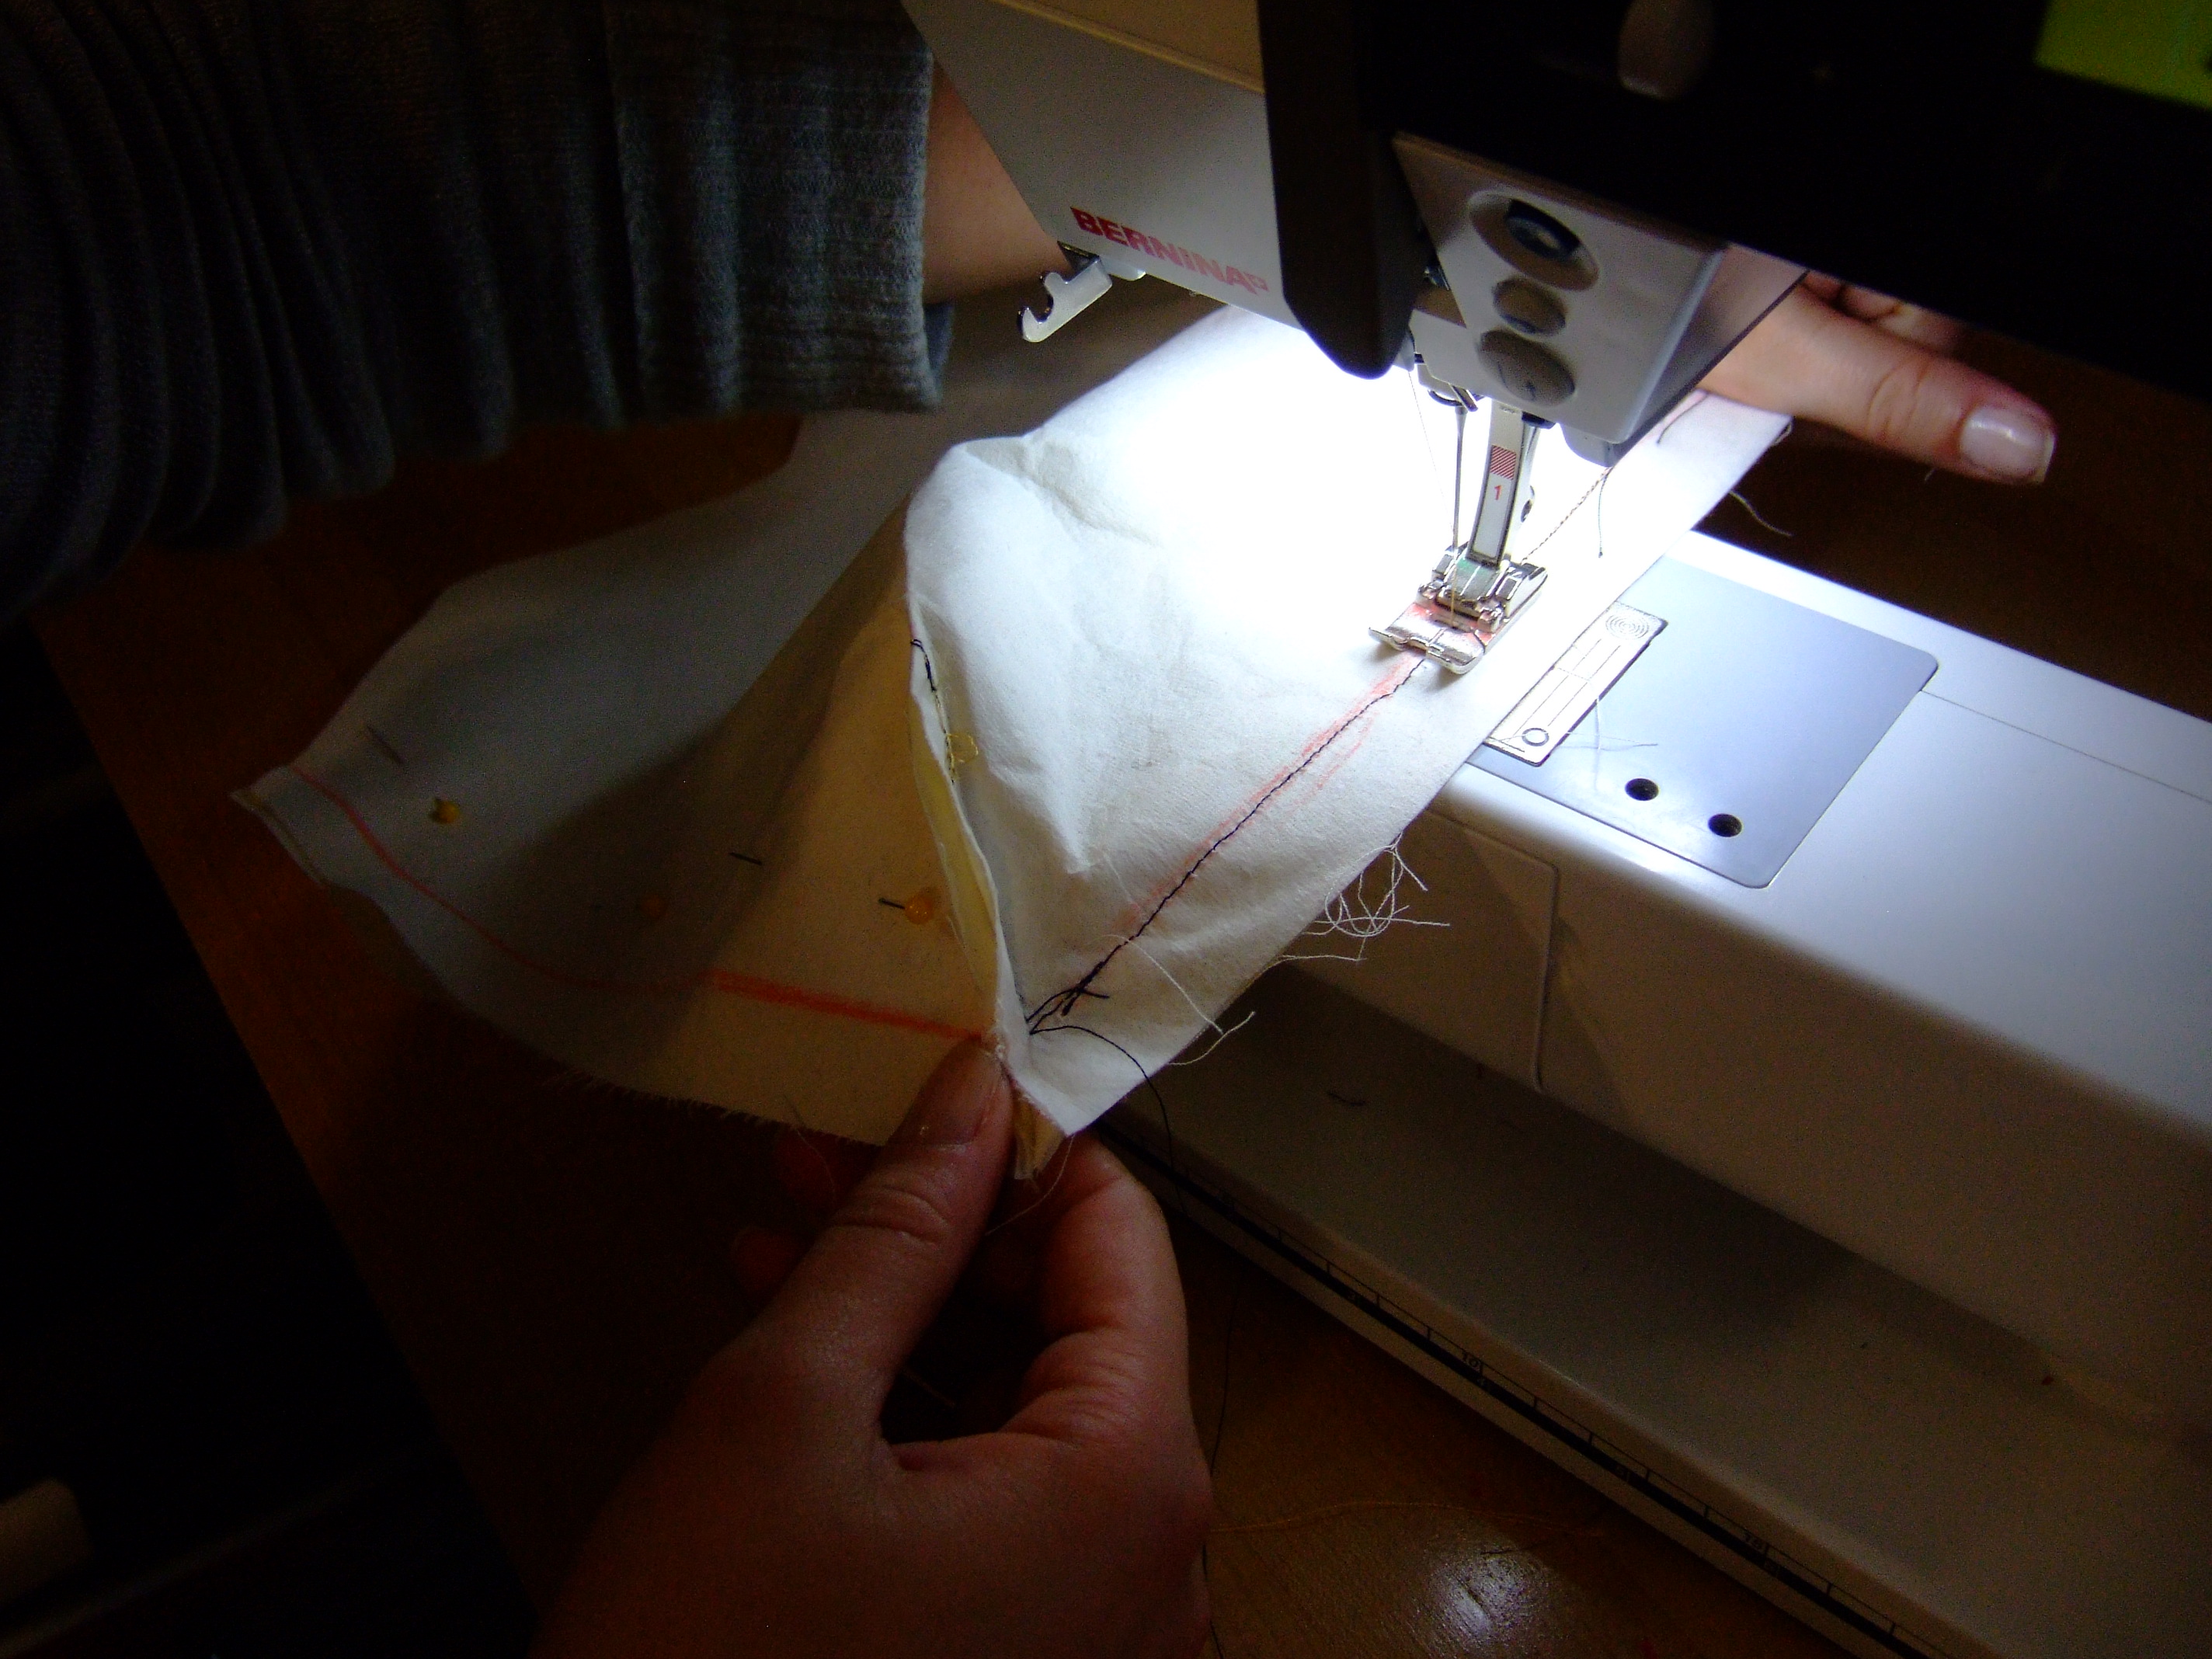 Sewing the bag prototype